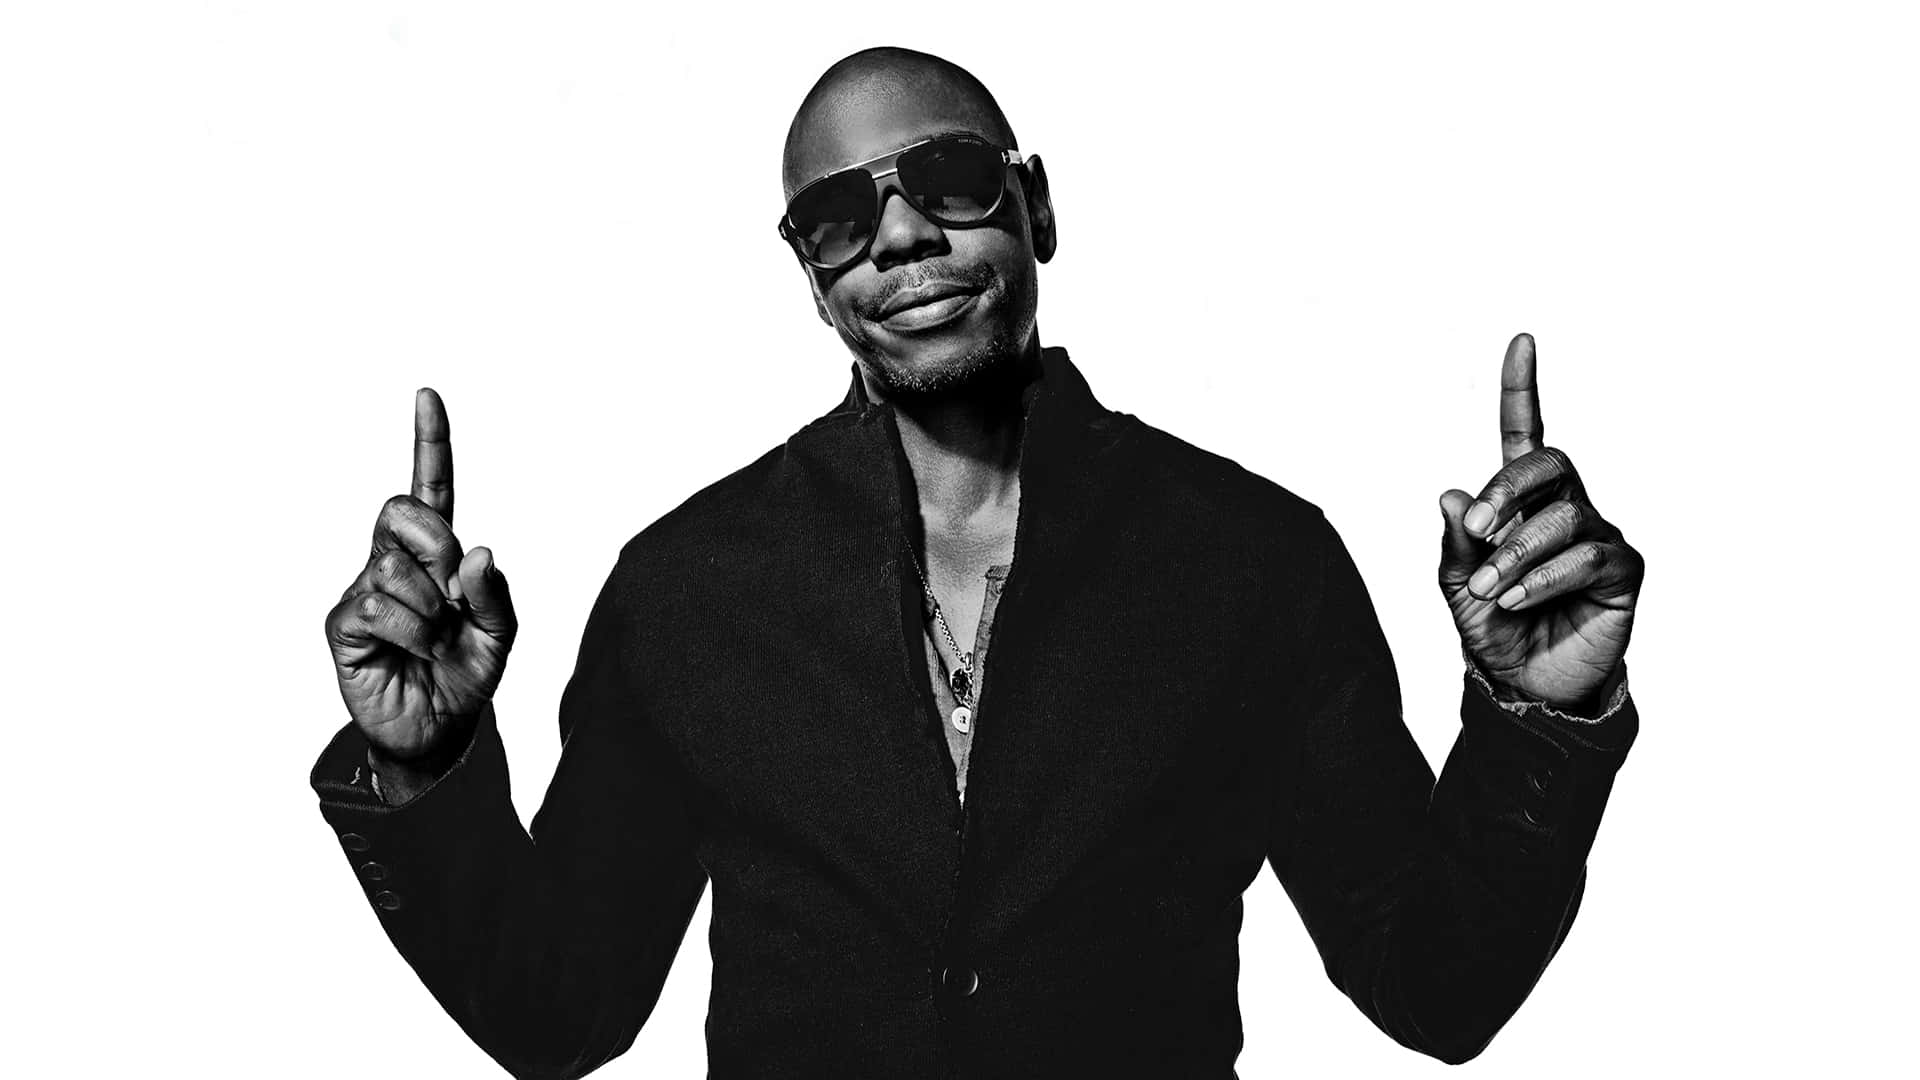 Legendary Comedian Dave Chappelle In Stand-up Performance Wallpaper